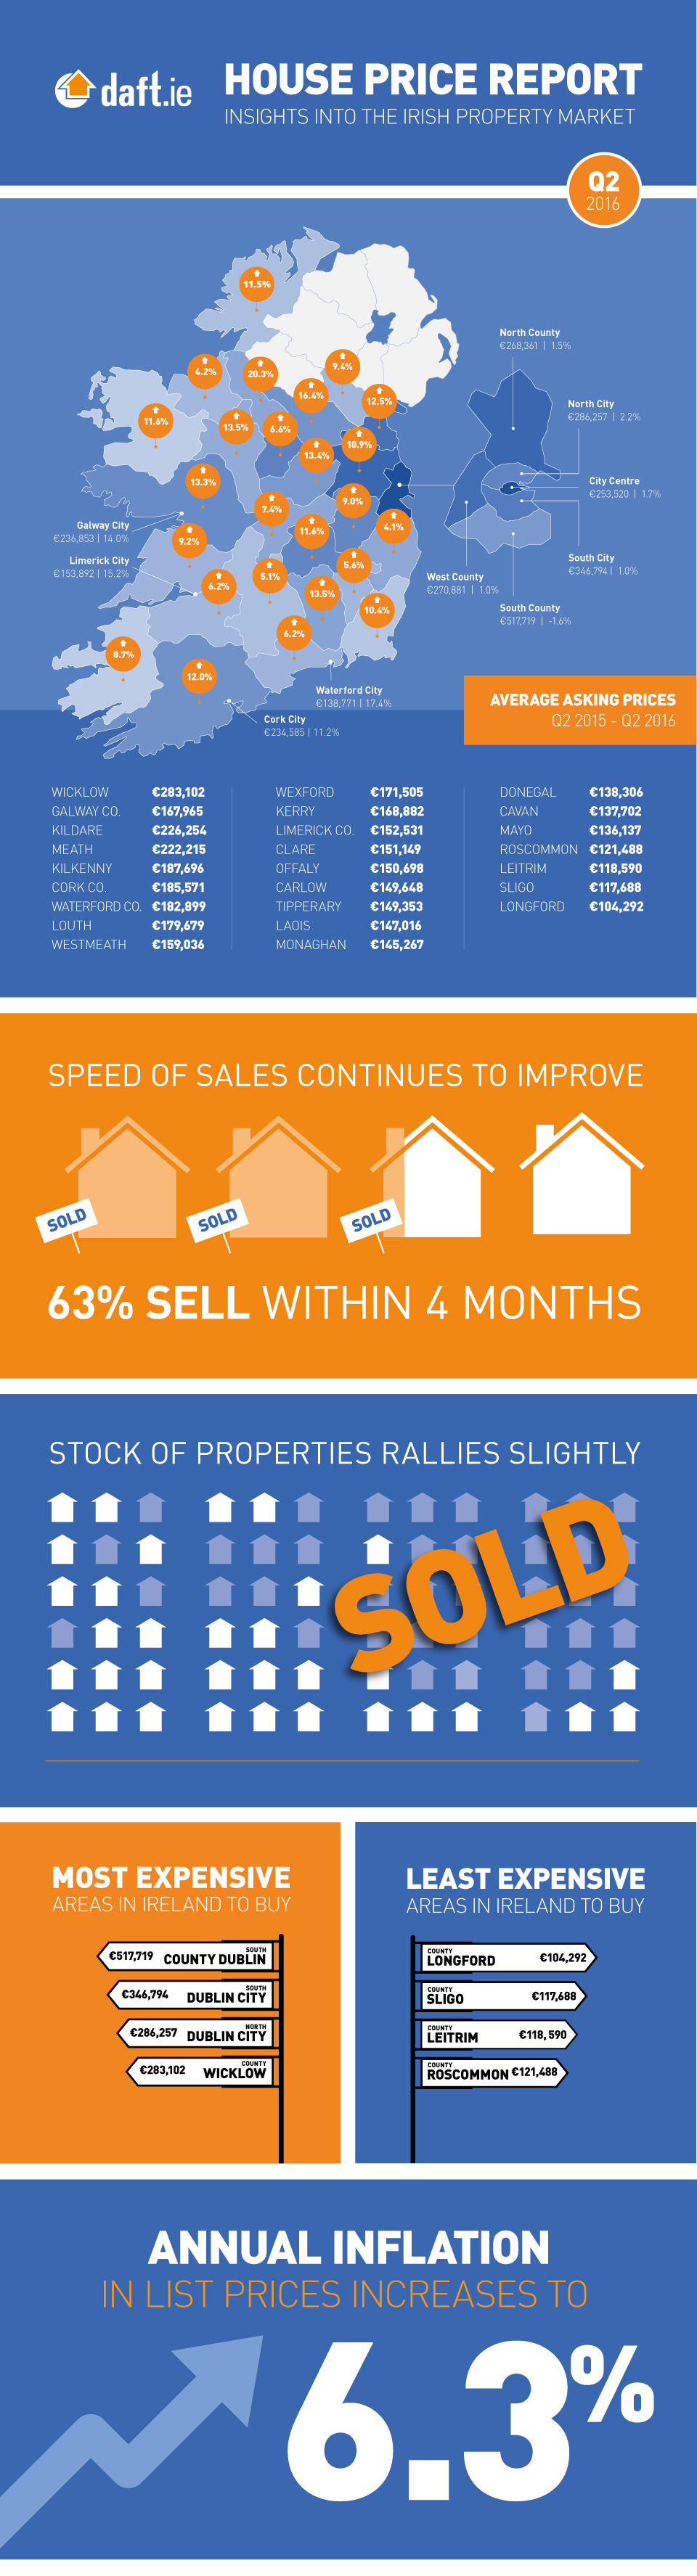 Daft.ie House Price Report: Q2 2016 Infographic